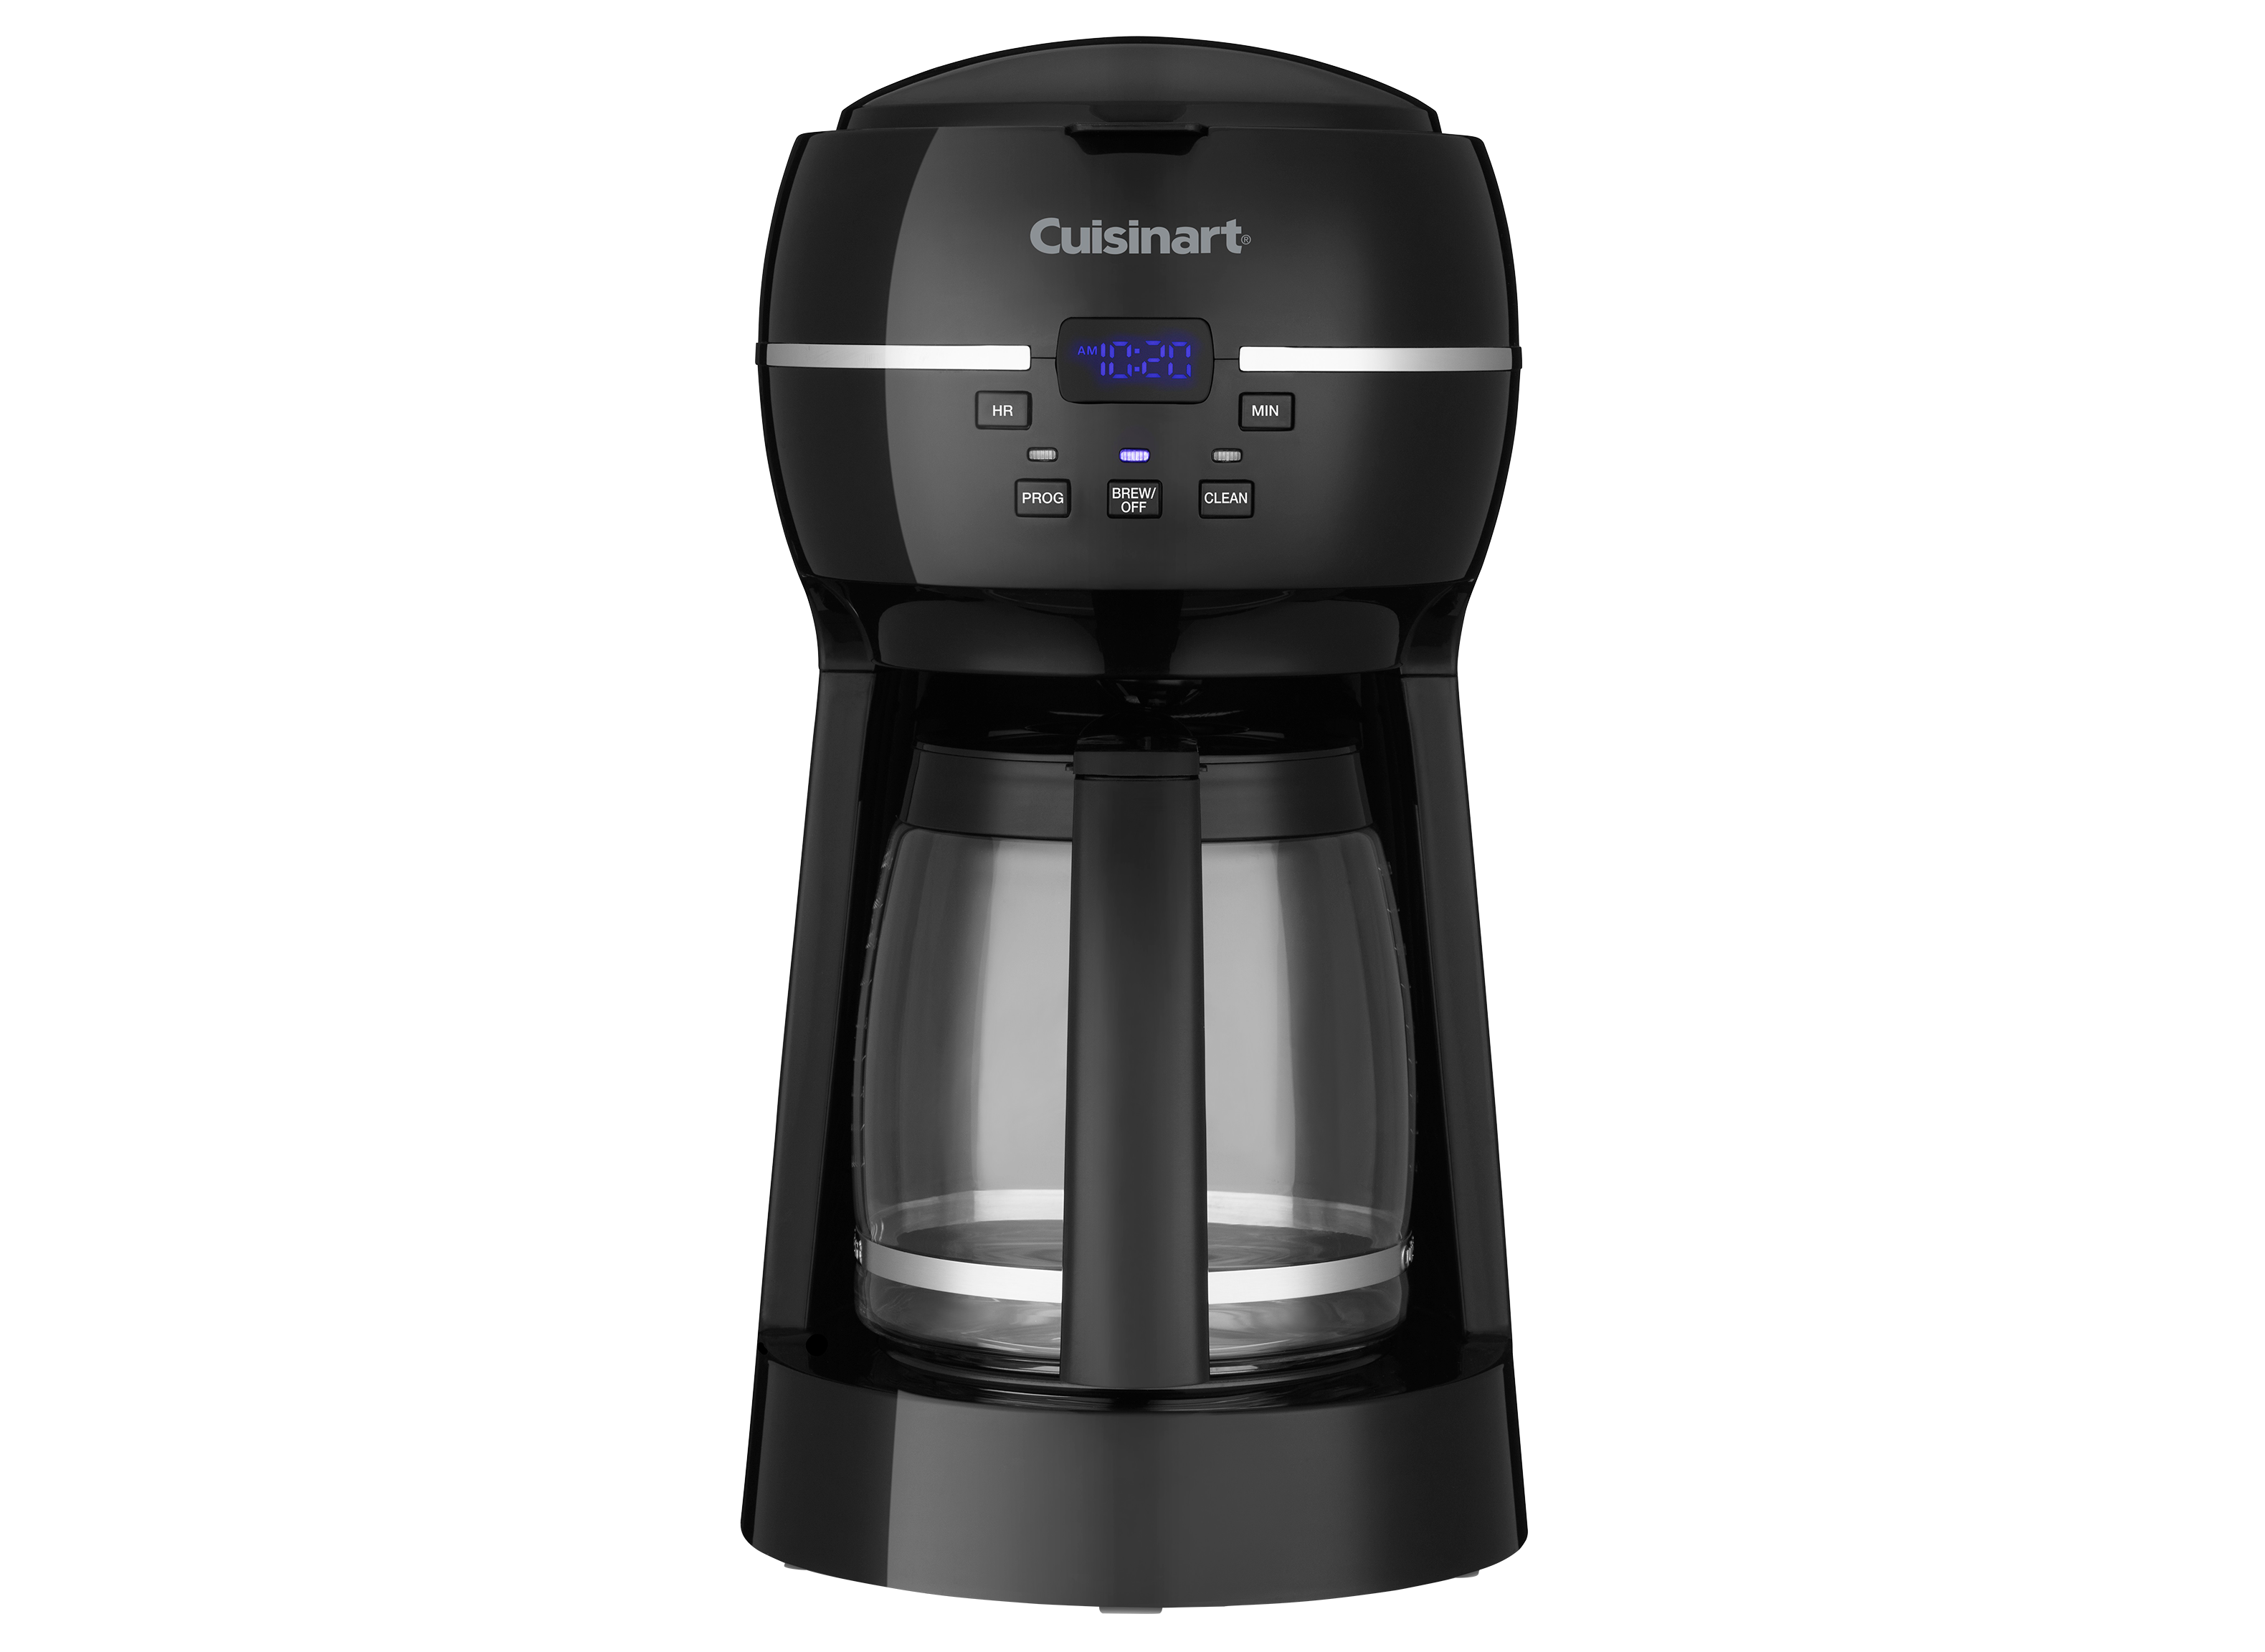 Discontinued 12 Cup Programmable Thermal Coffeemaker